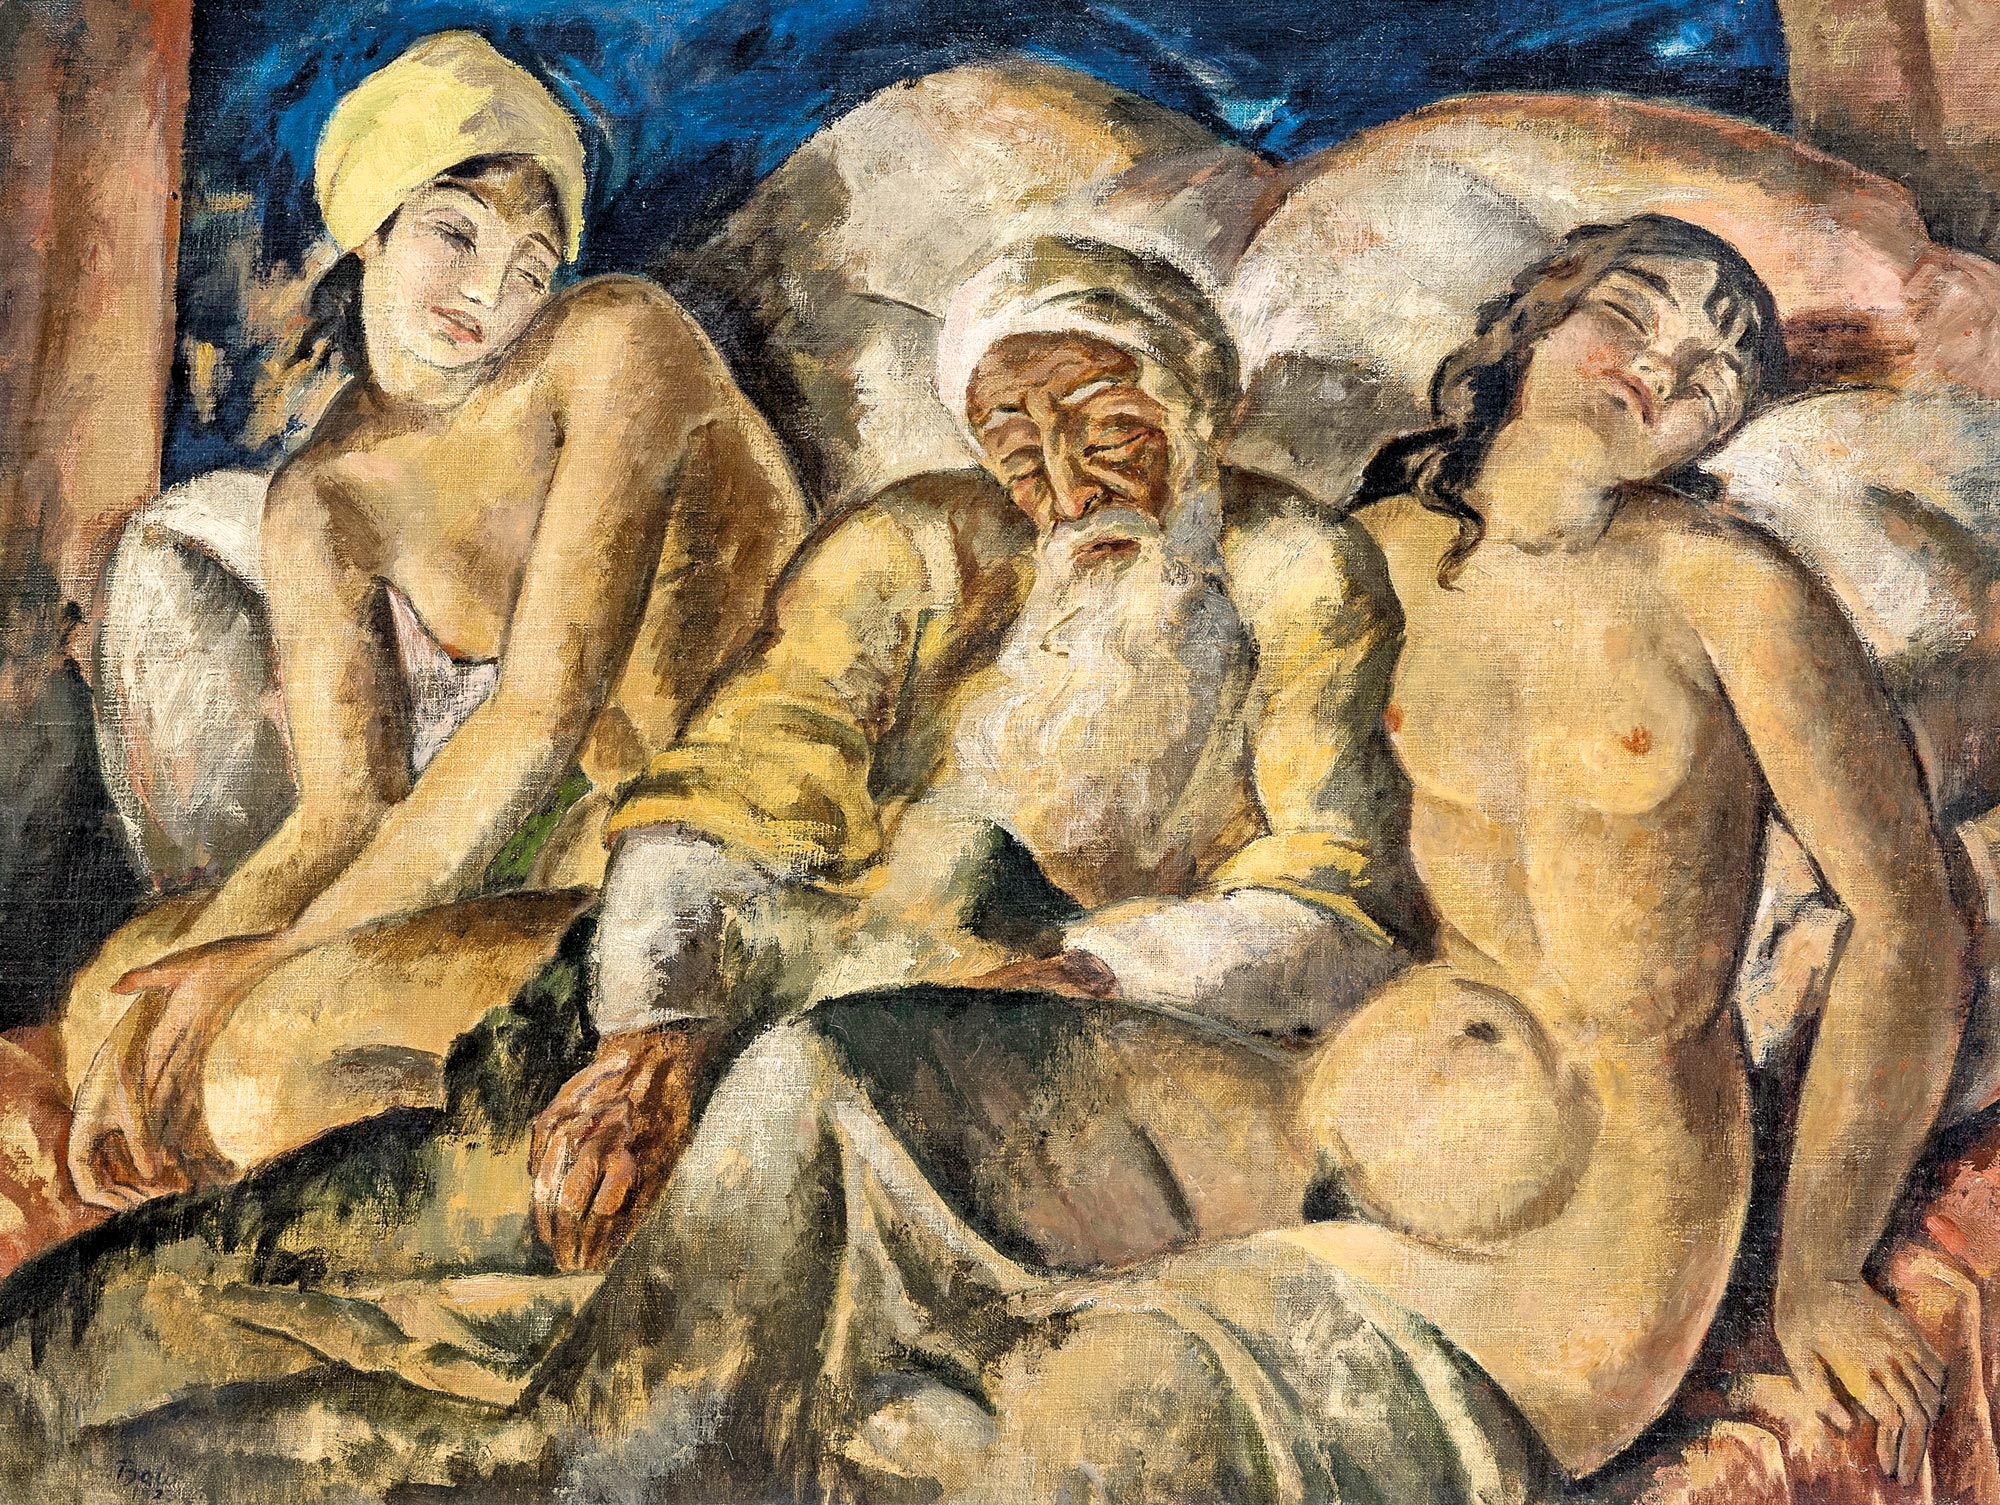 Lot and his daughters by József Bató, 1923